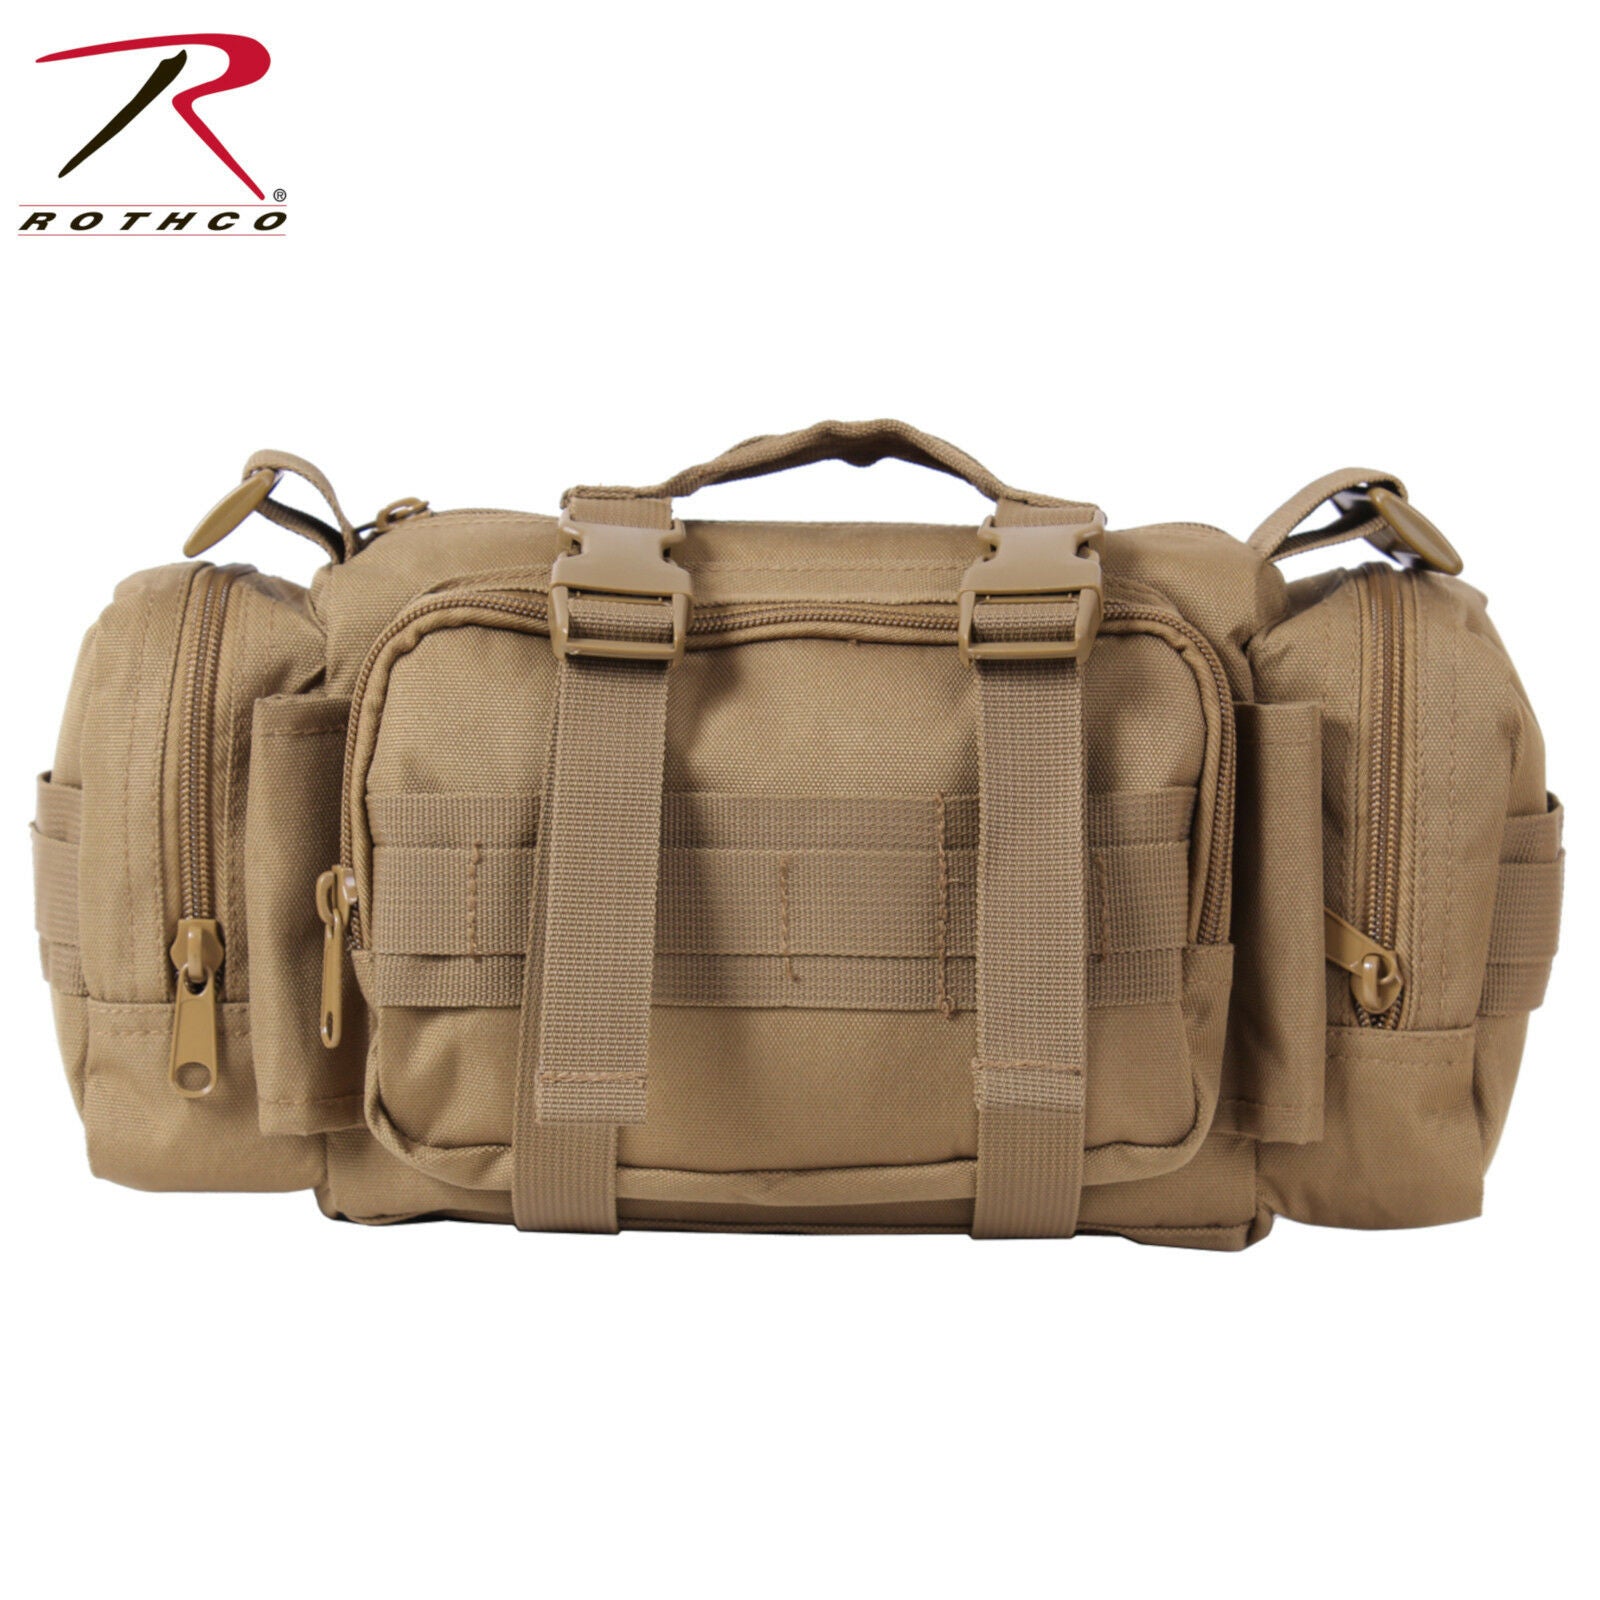 Rothco Fast Access Tactical Trauma Kit-Bag - Includes Over 80 First Ai ...